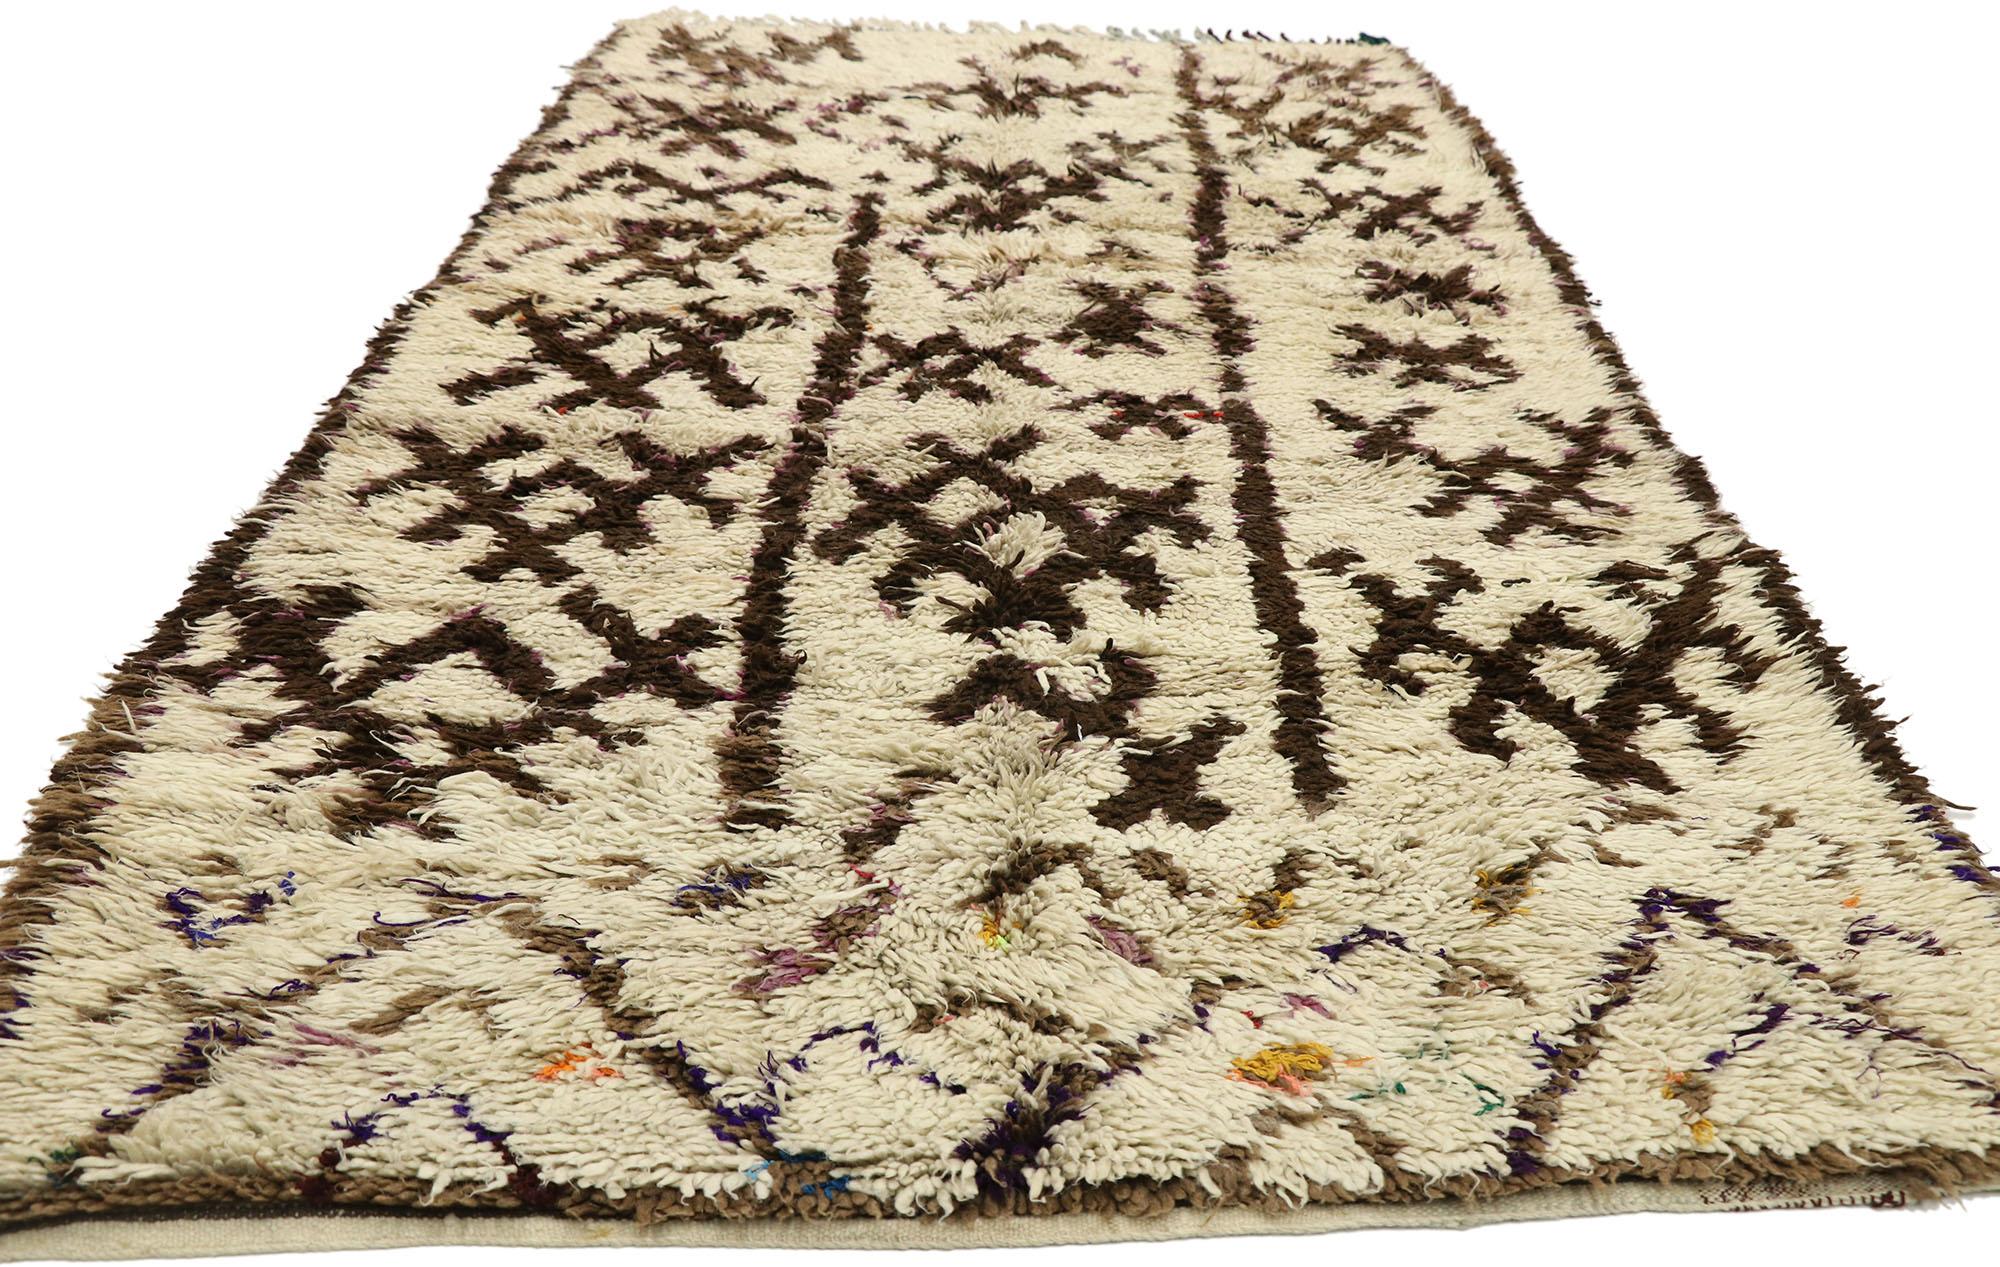 20293 Vintage Moroccan Azilal Rug, 04’09 x 10’10. Embark on a captivating journey into the vibrant heritage of Azilal rugs, originating from the bustling center of the provincial capital in central Morocco, cradled within the majestic High Atlas